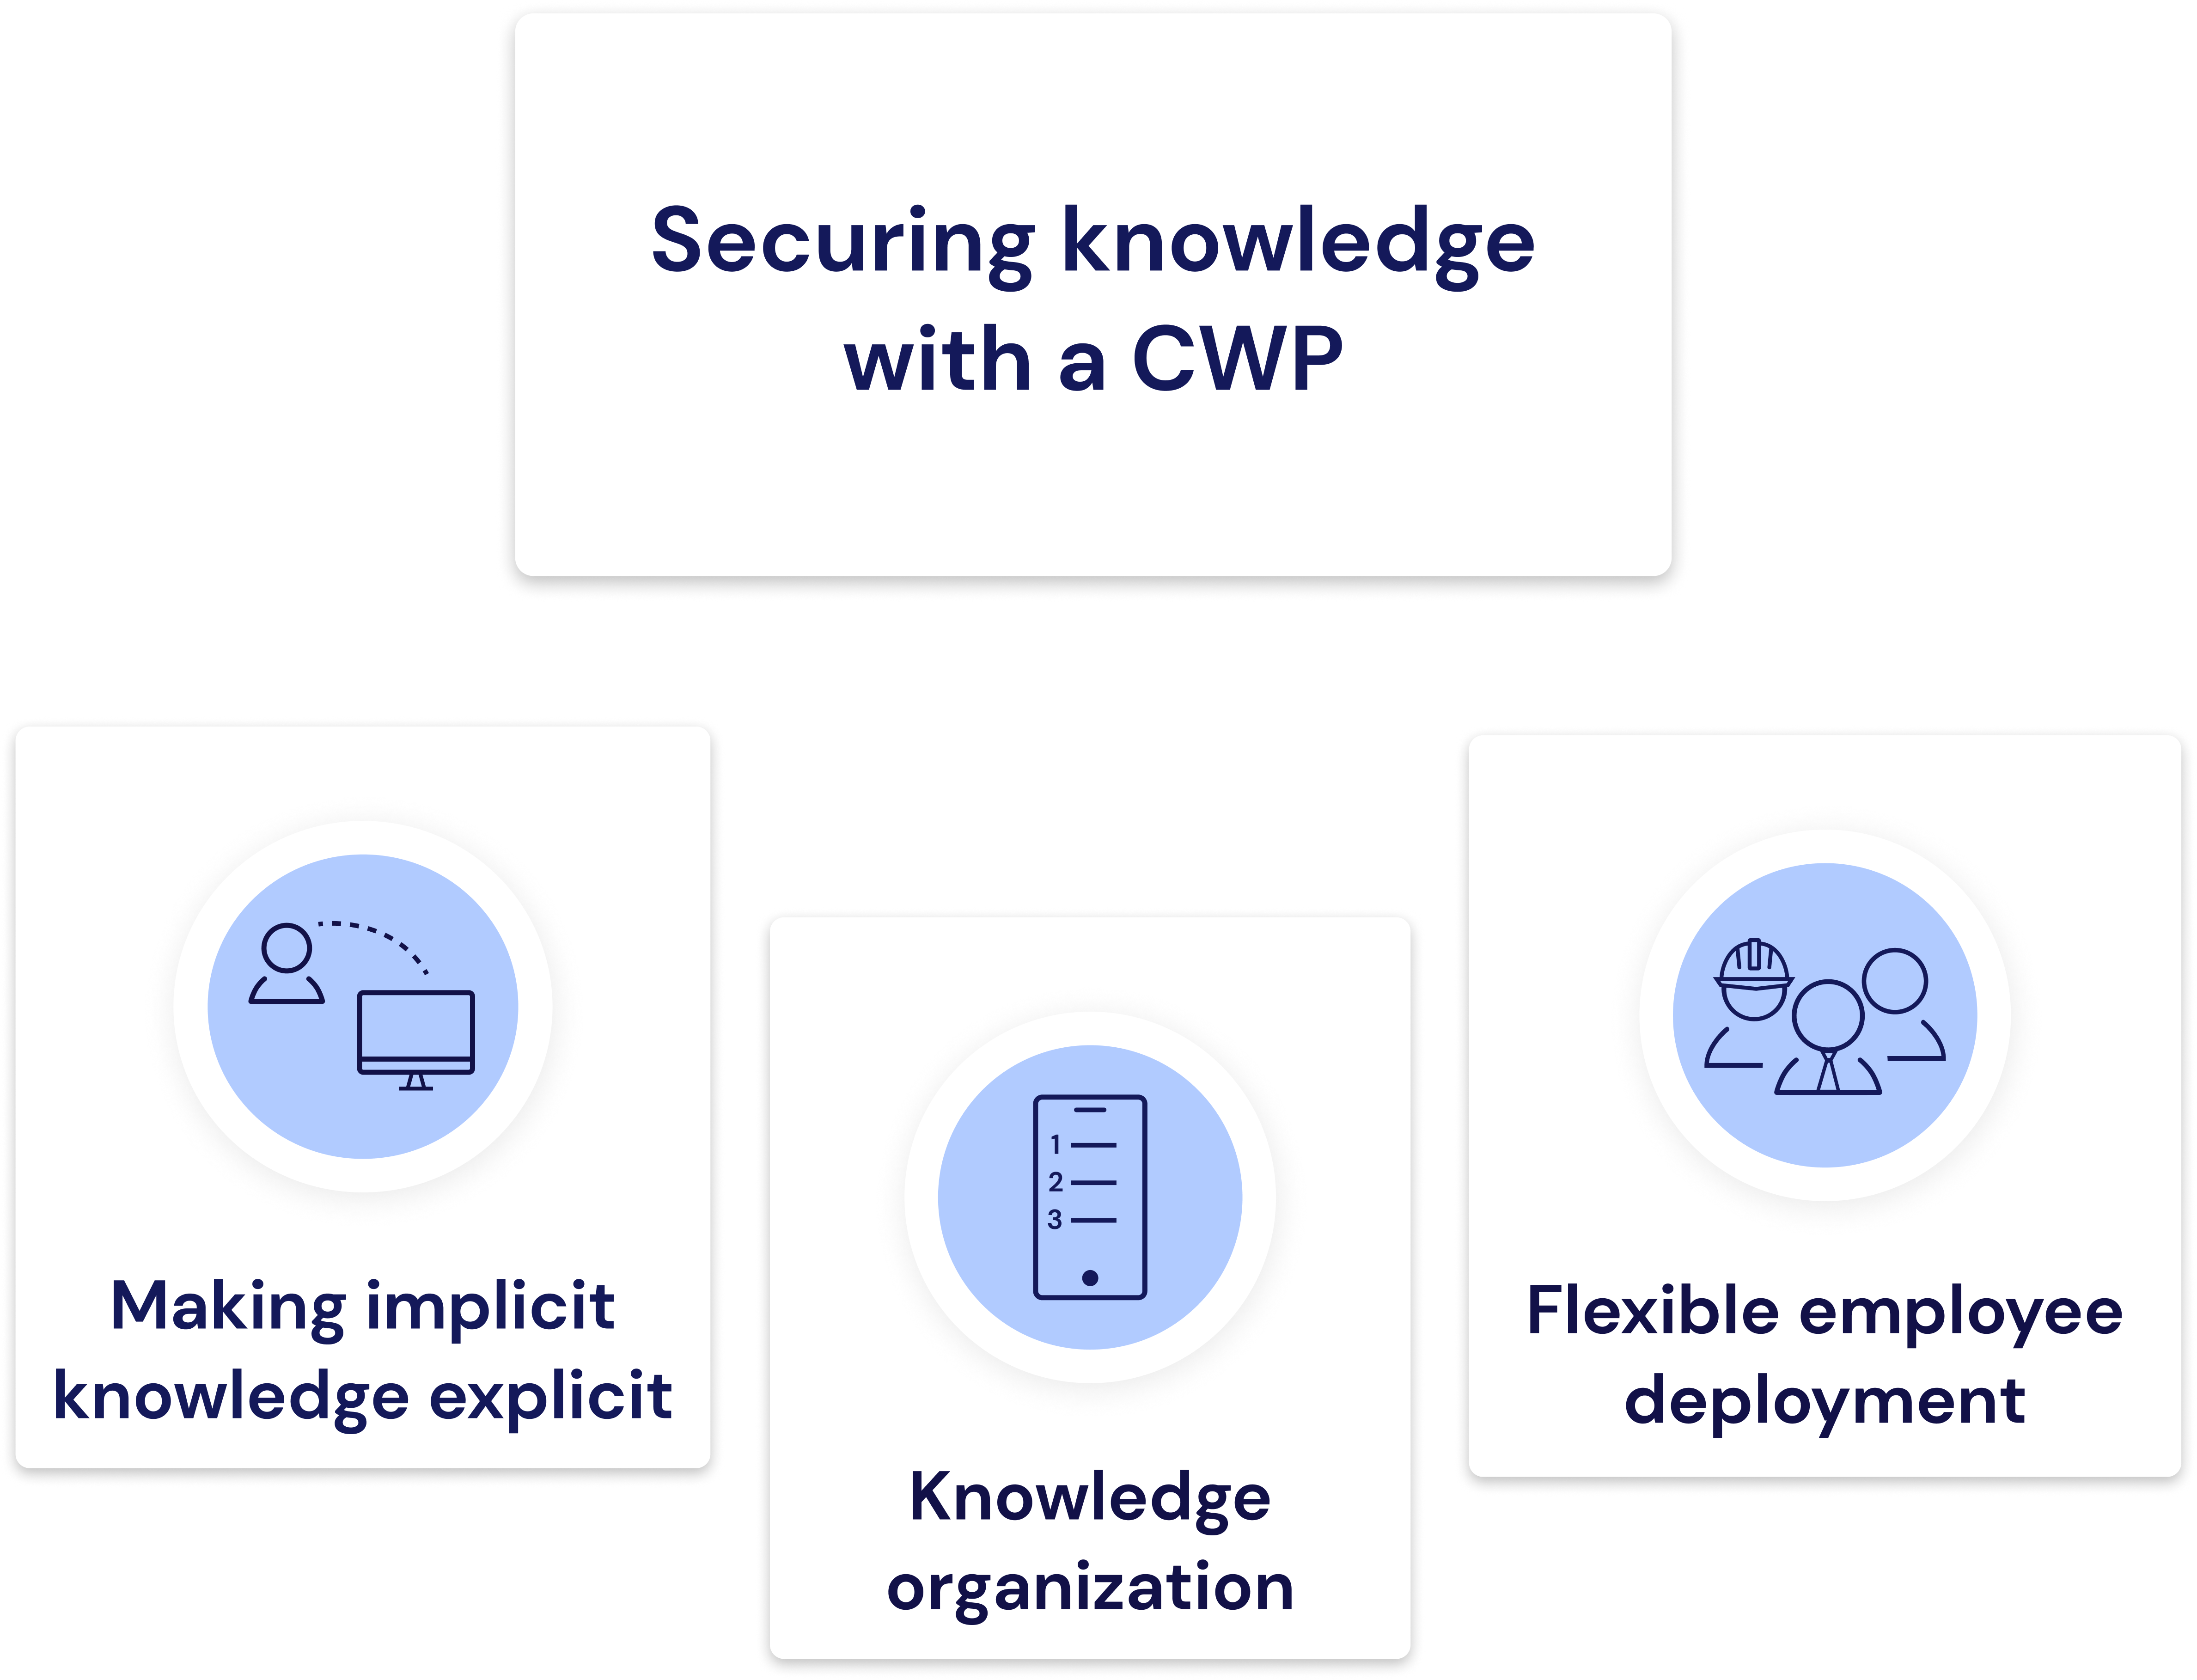 Securing knowledge with a Connected Worker Platform